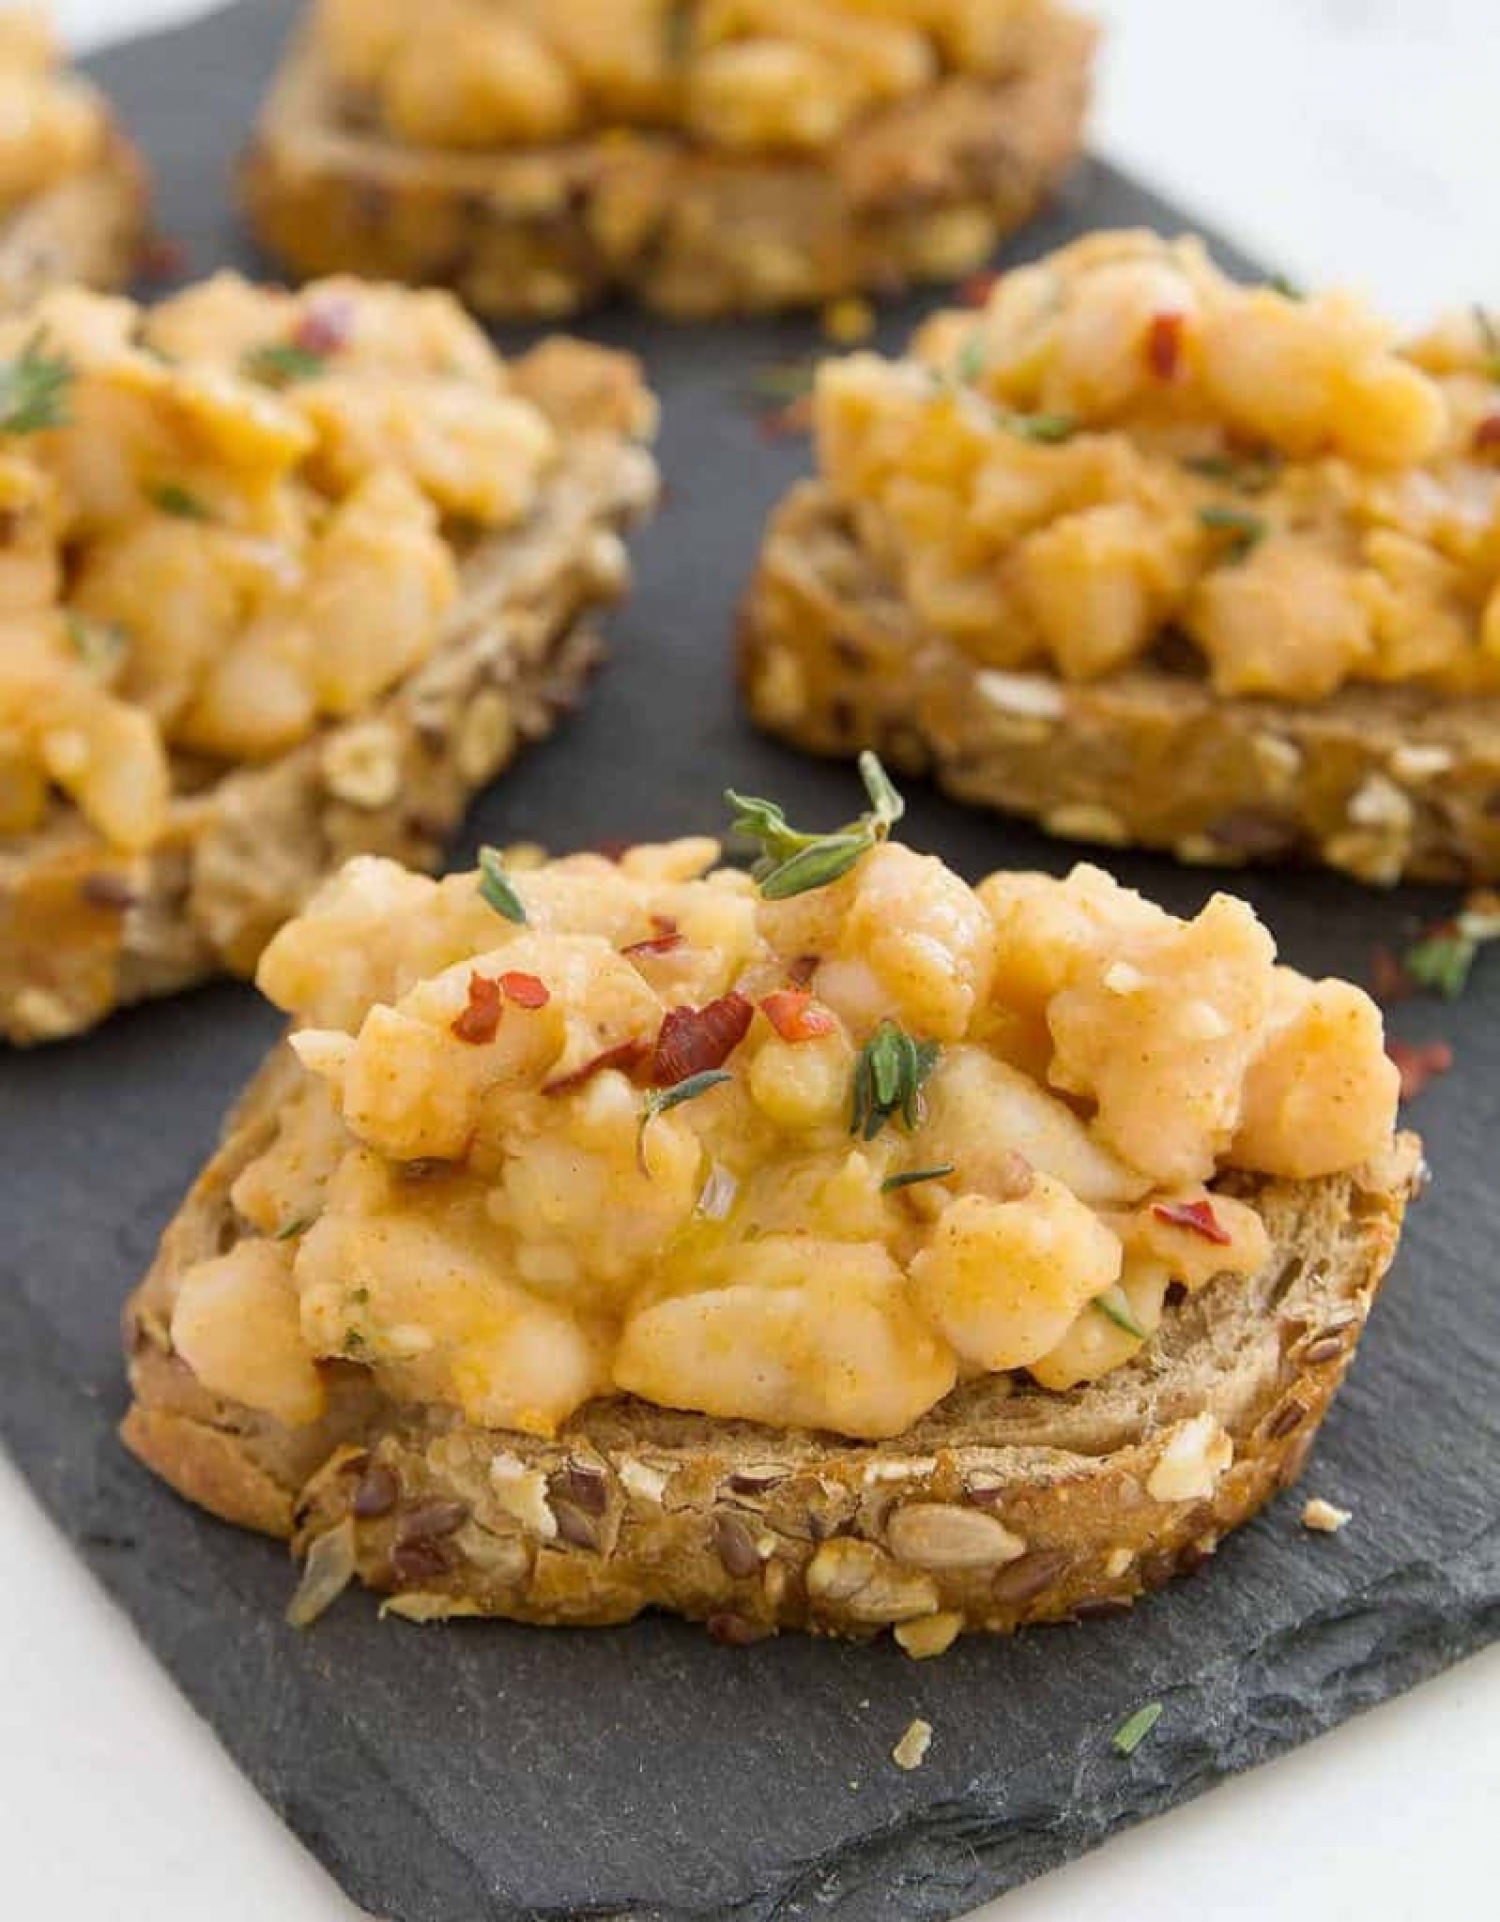 <p>These healthy and sophisticated beans on toast are an excellent alternative to tomato bruschetta when you want to serve something slightly more filling. The beans are seasoned with smoked paprika and chili flakes for a little heat and get lightly mashed for a perfectly chunky yet softened texture. <a href="https://theclevermeal.com/smoky-beans-on-toast/" rel="noopener">Get the recipe here.</a></p>